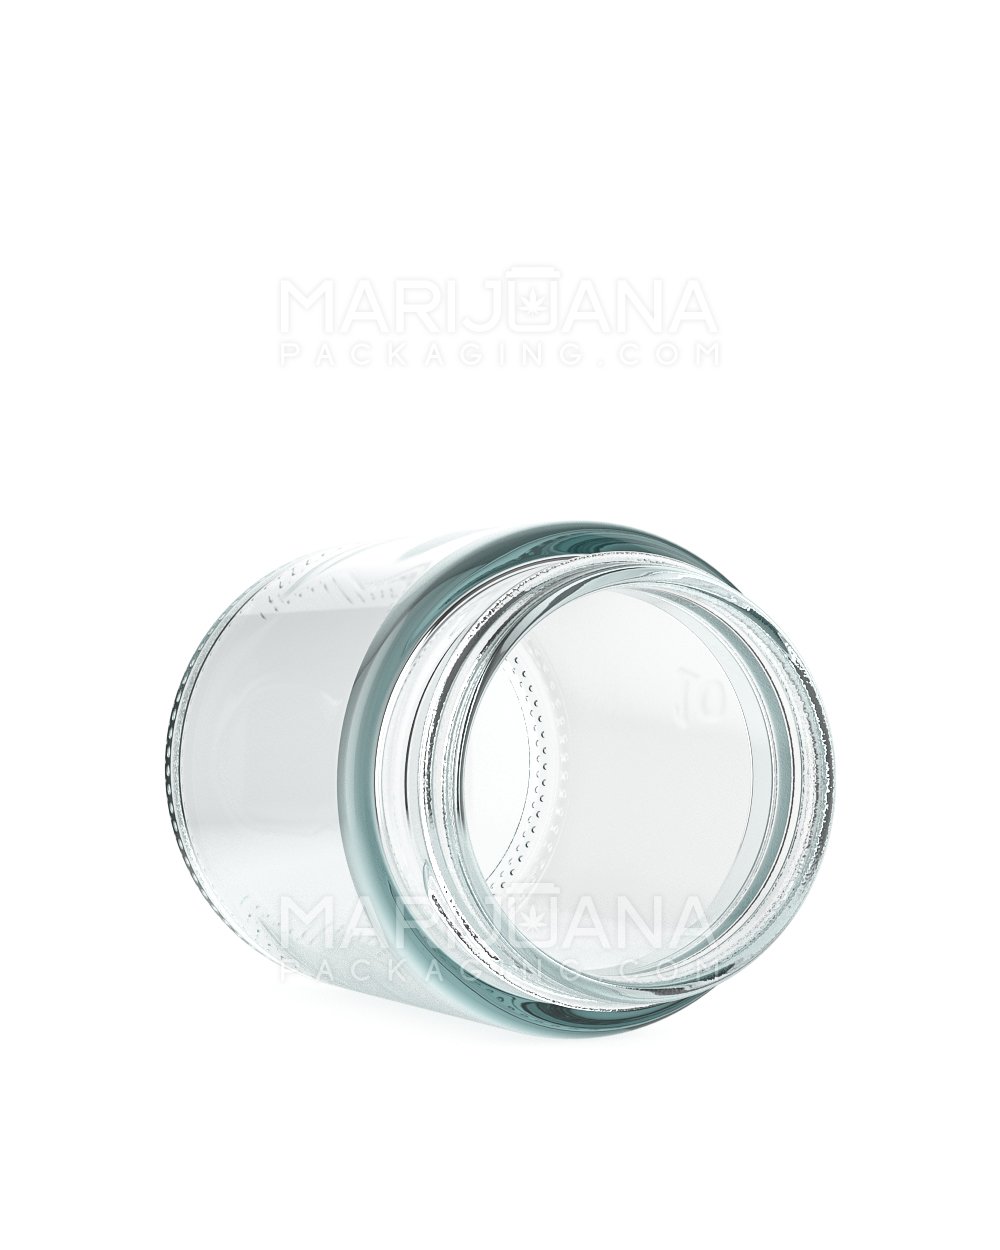 Straight Sided Clear Glass Jars | 50mm - 4oz - 100 Count - 3